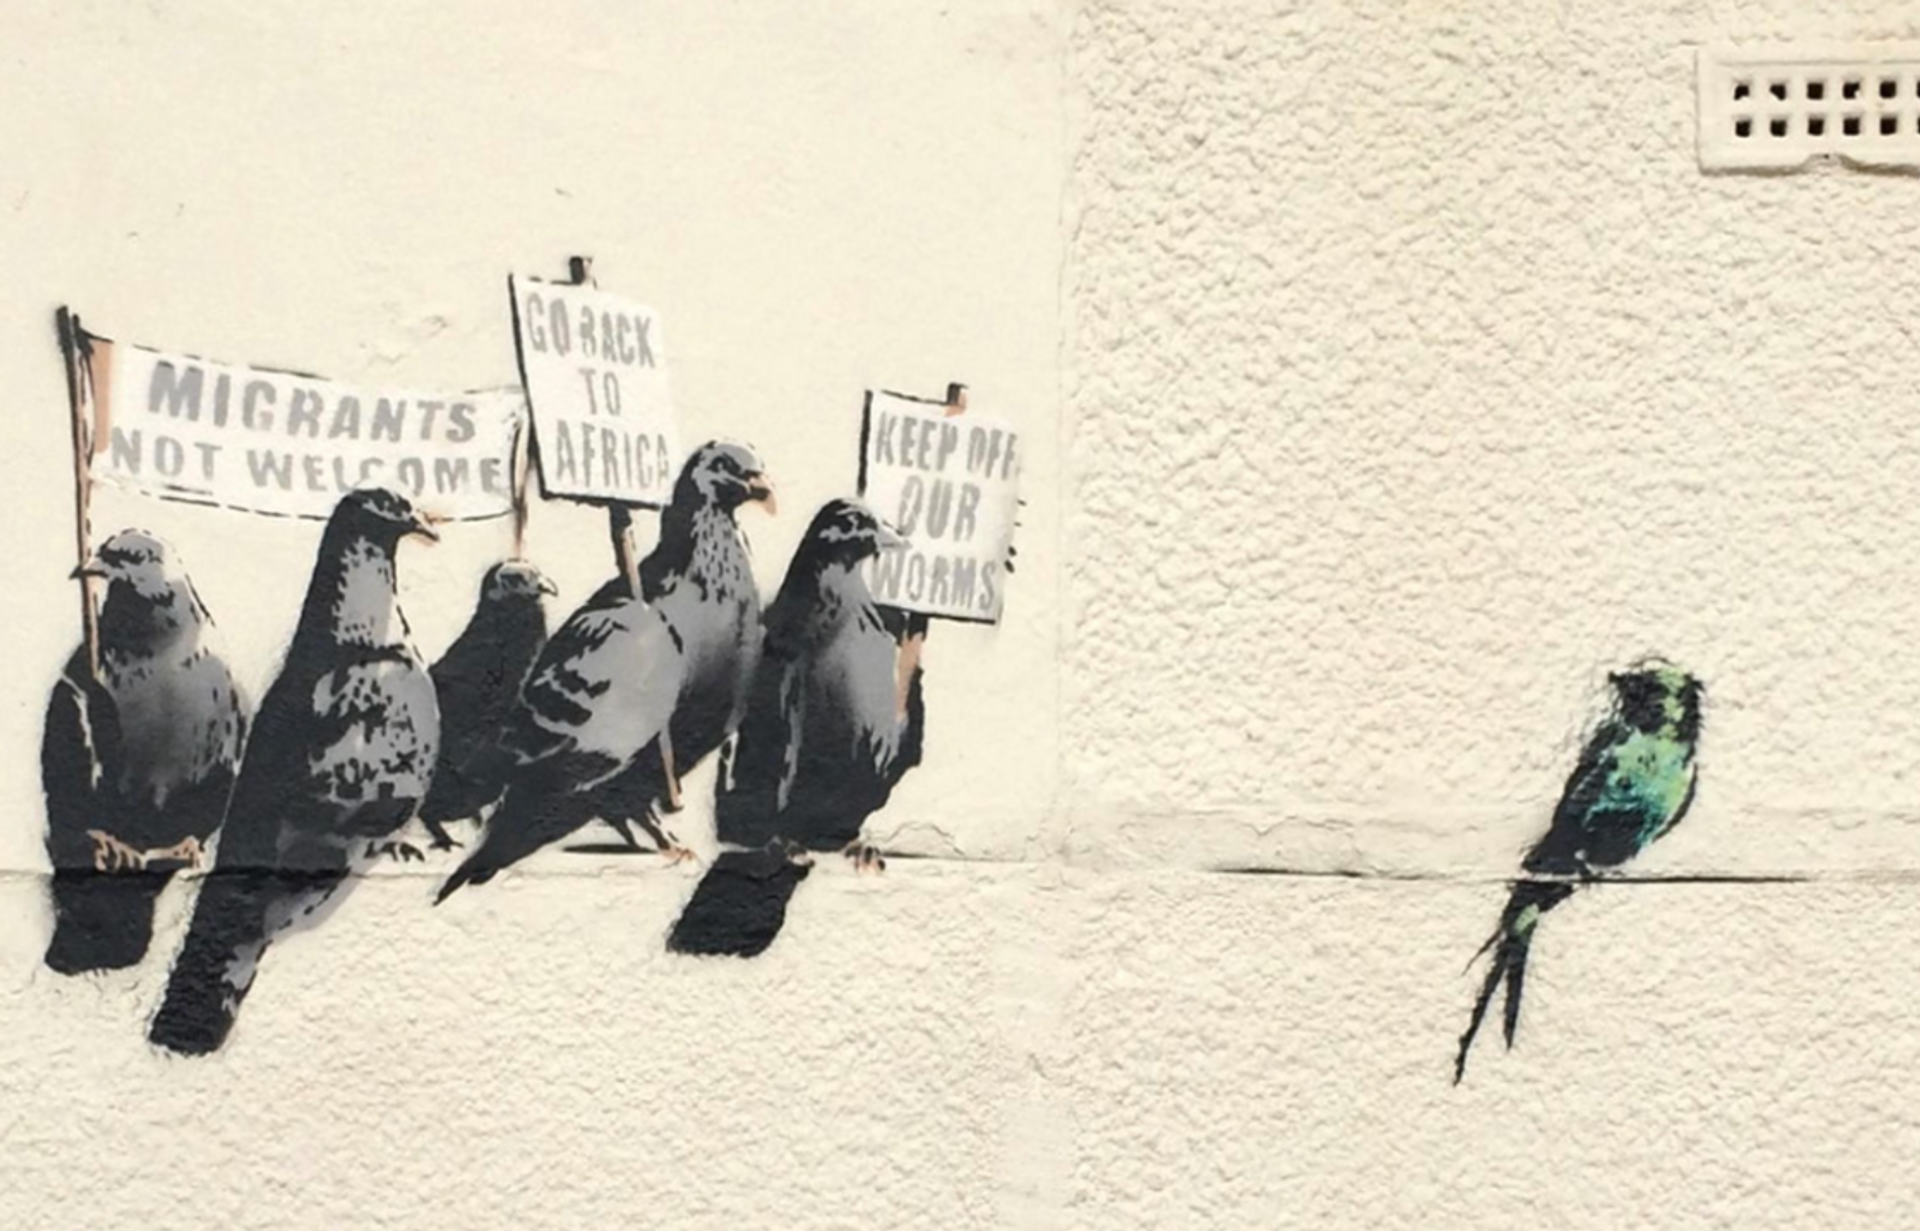 Migrants Not Welcome by Banksy